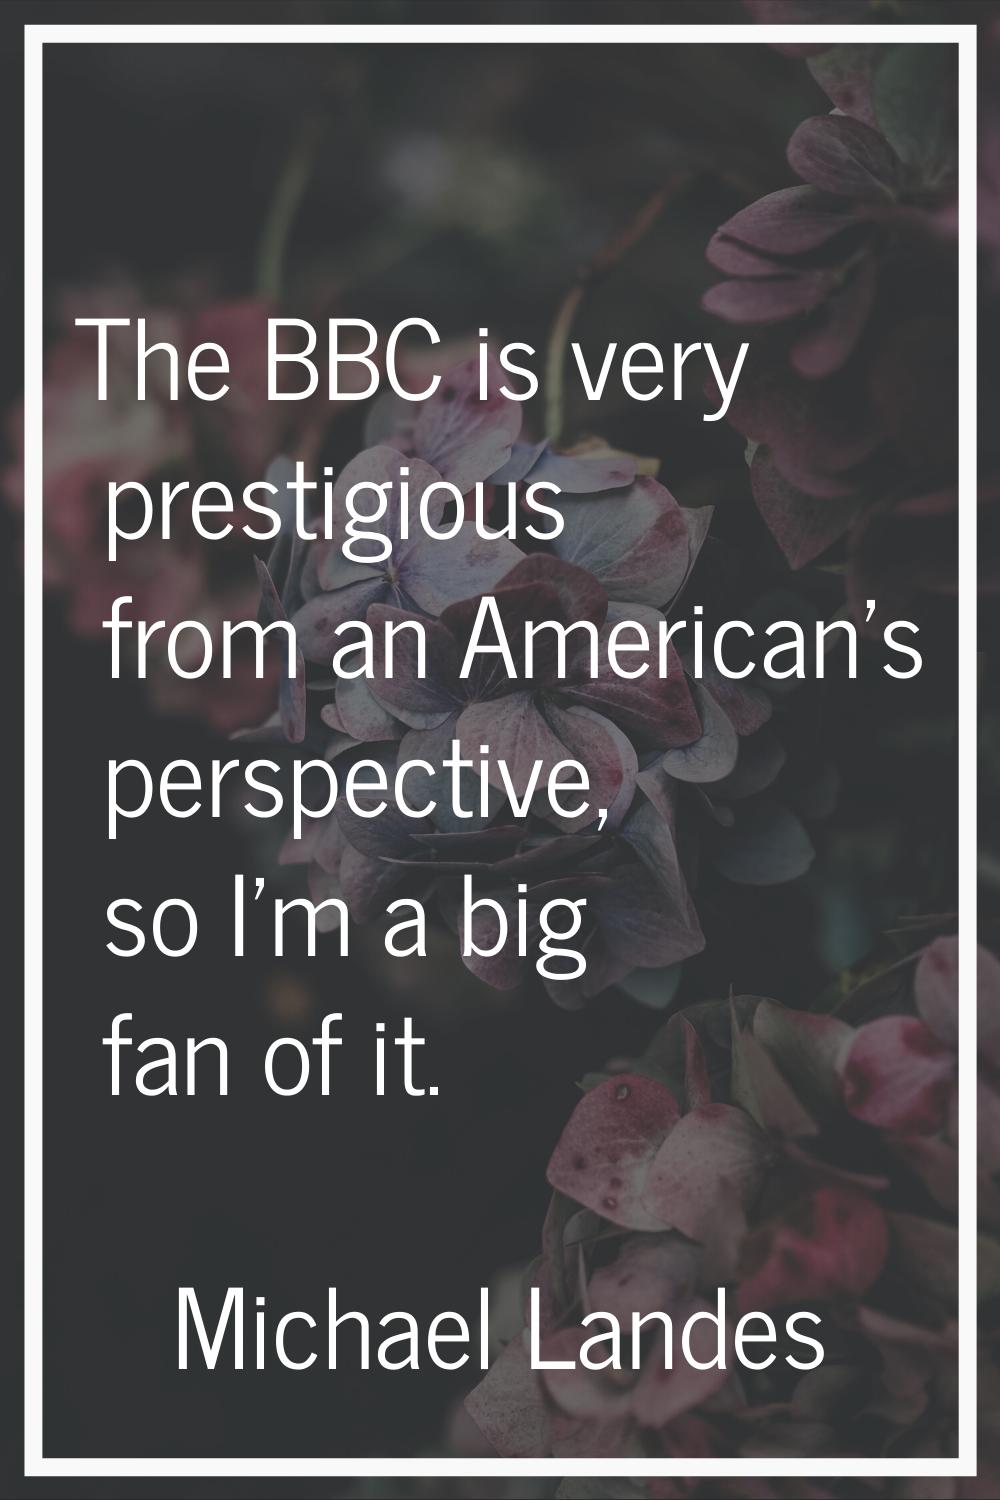 The BBC is very prestigious from an American's perspective, so I'm a big fan of it.